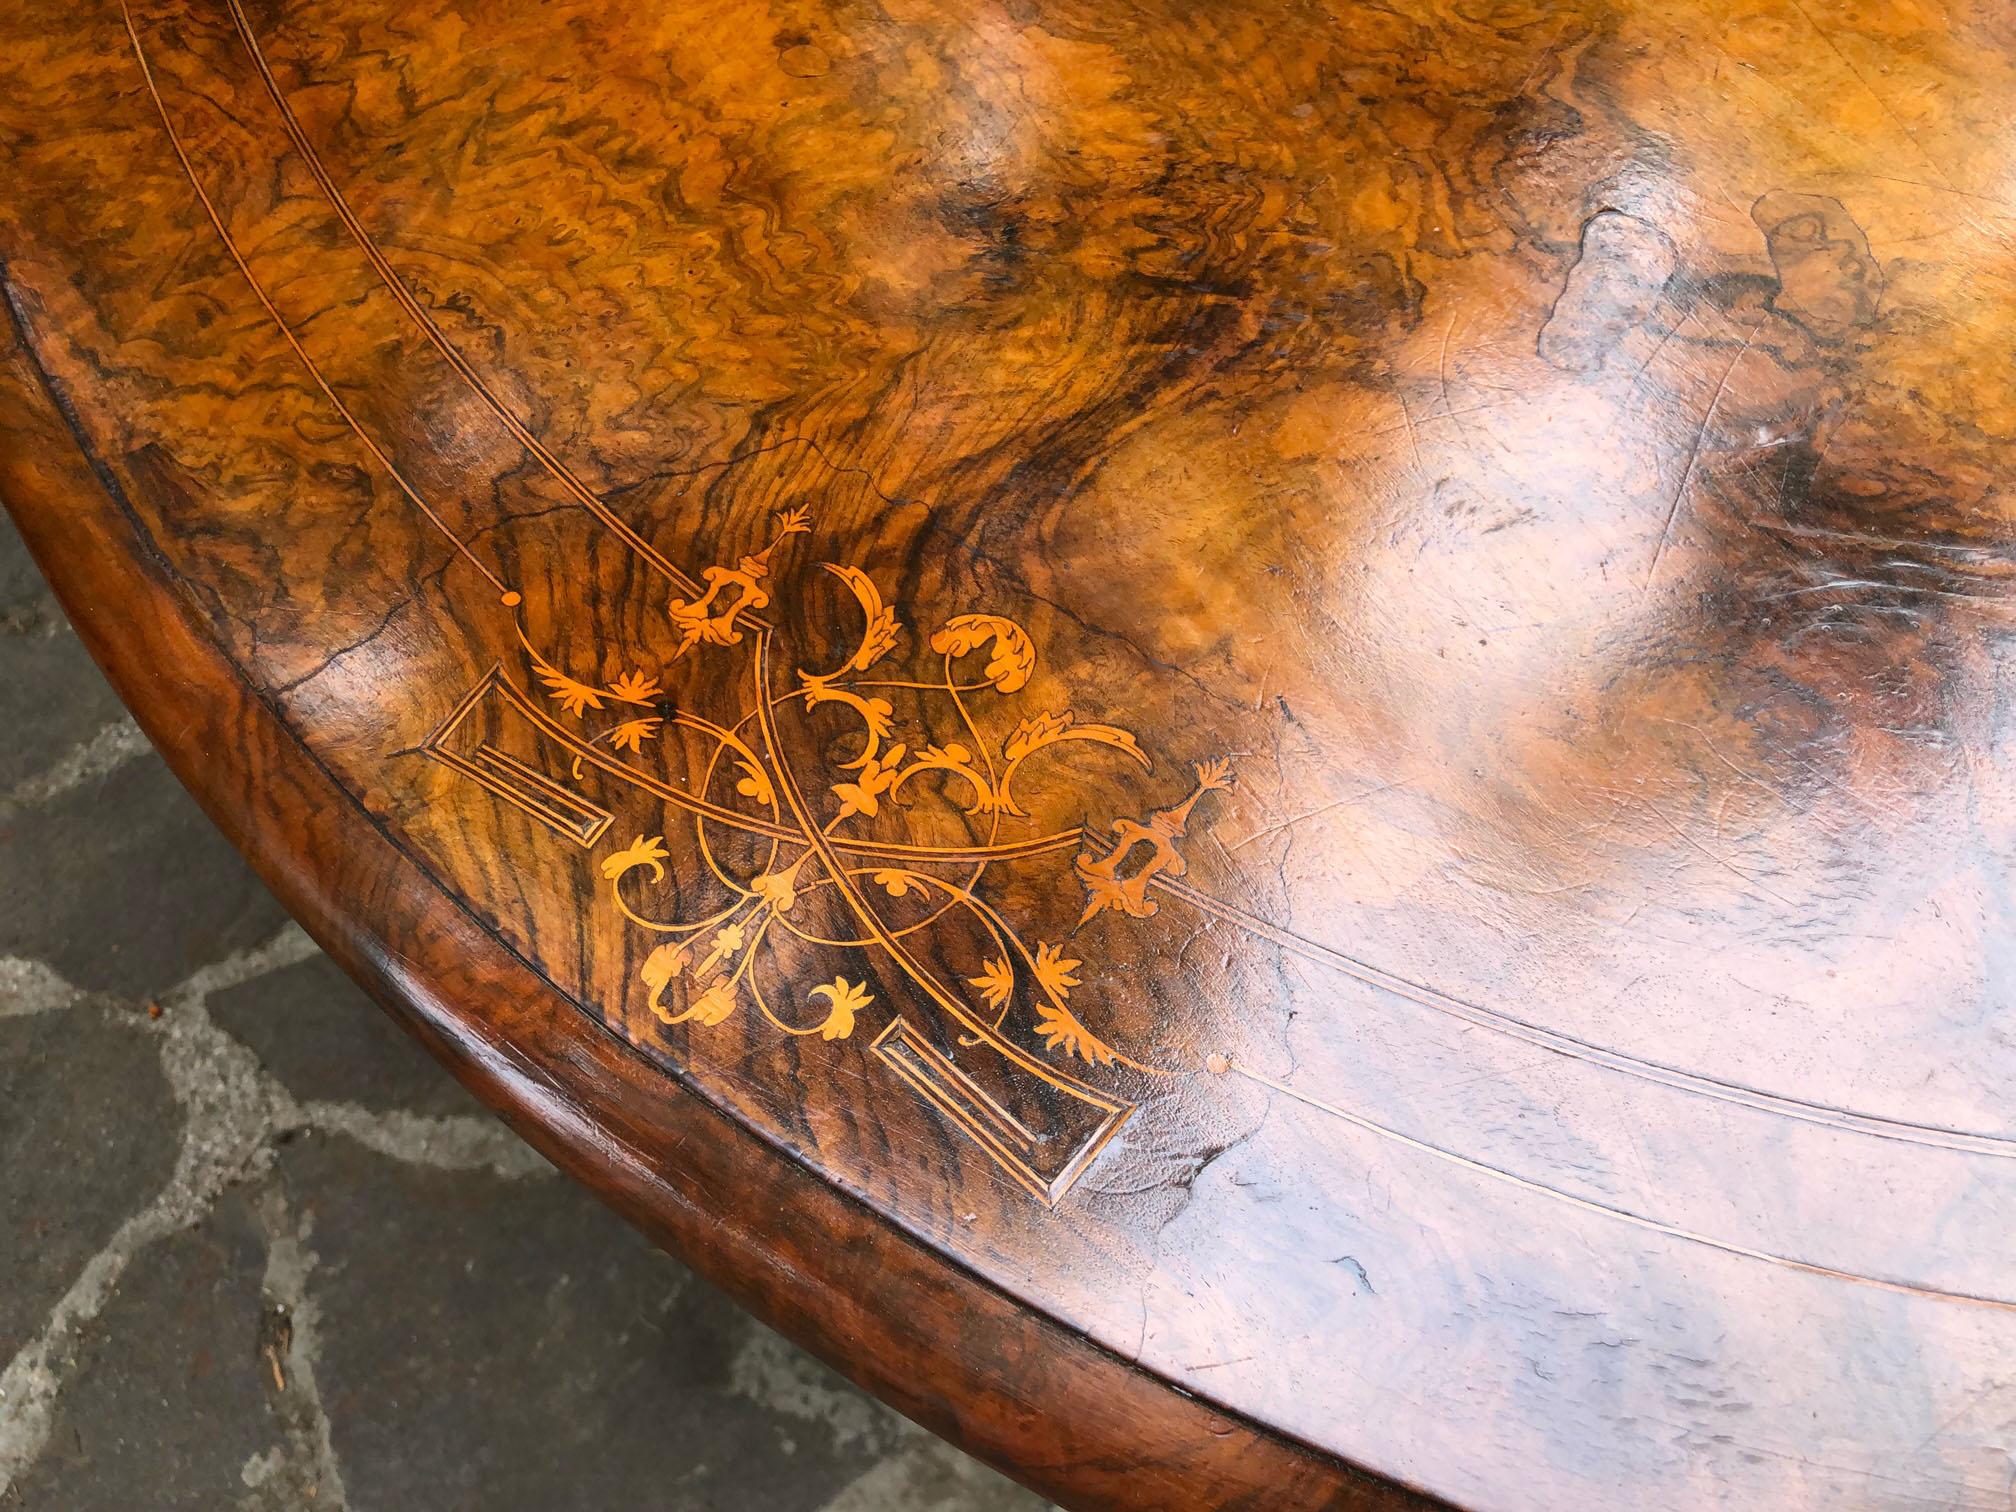 Oval sail table in briar root walnut, from 1900, original from Tuscany.
Inlaid elegant top, solid wood legs.
Comes from an old country house in the Chianti area of Tuscany.
The paint is original in patina, honey amber color. 
The table has been